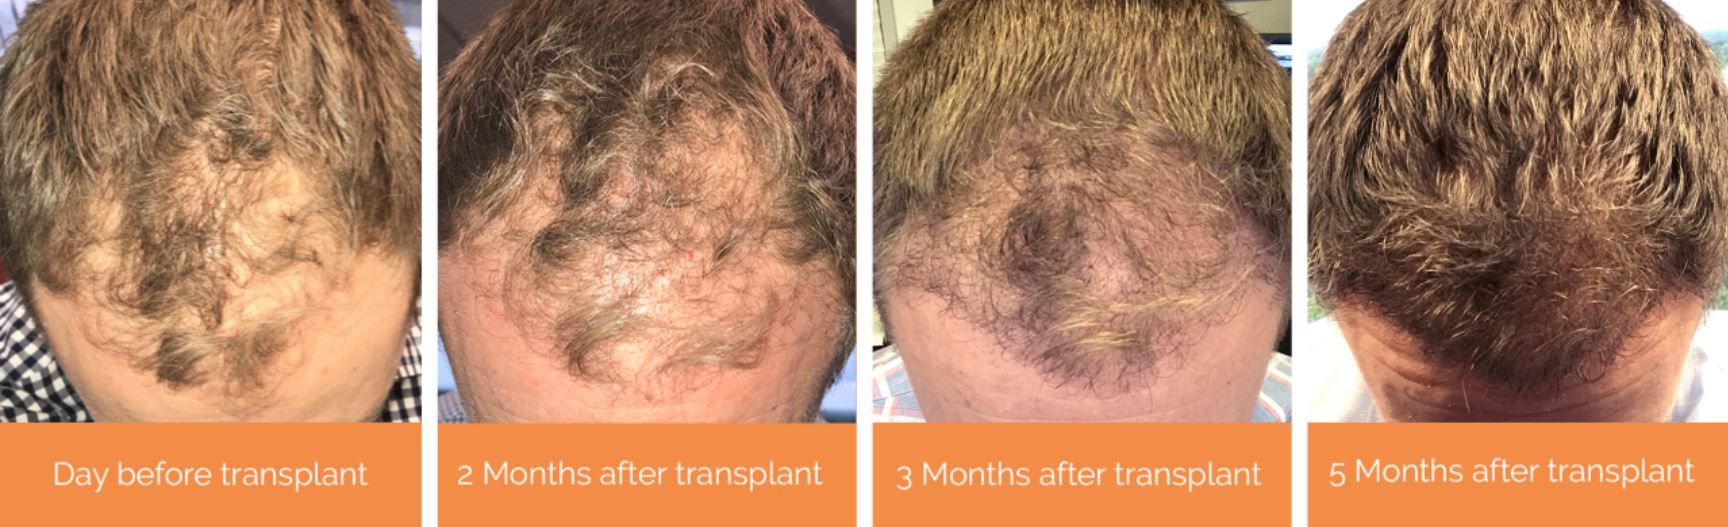 photo examples showing the growth of a hair transplant over months